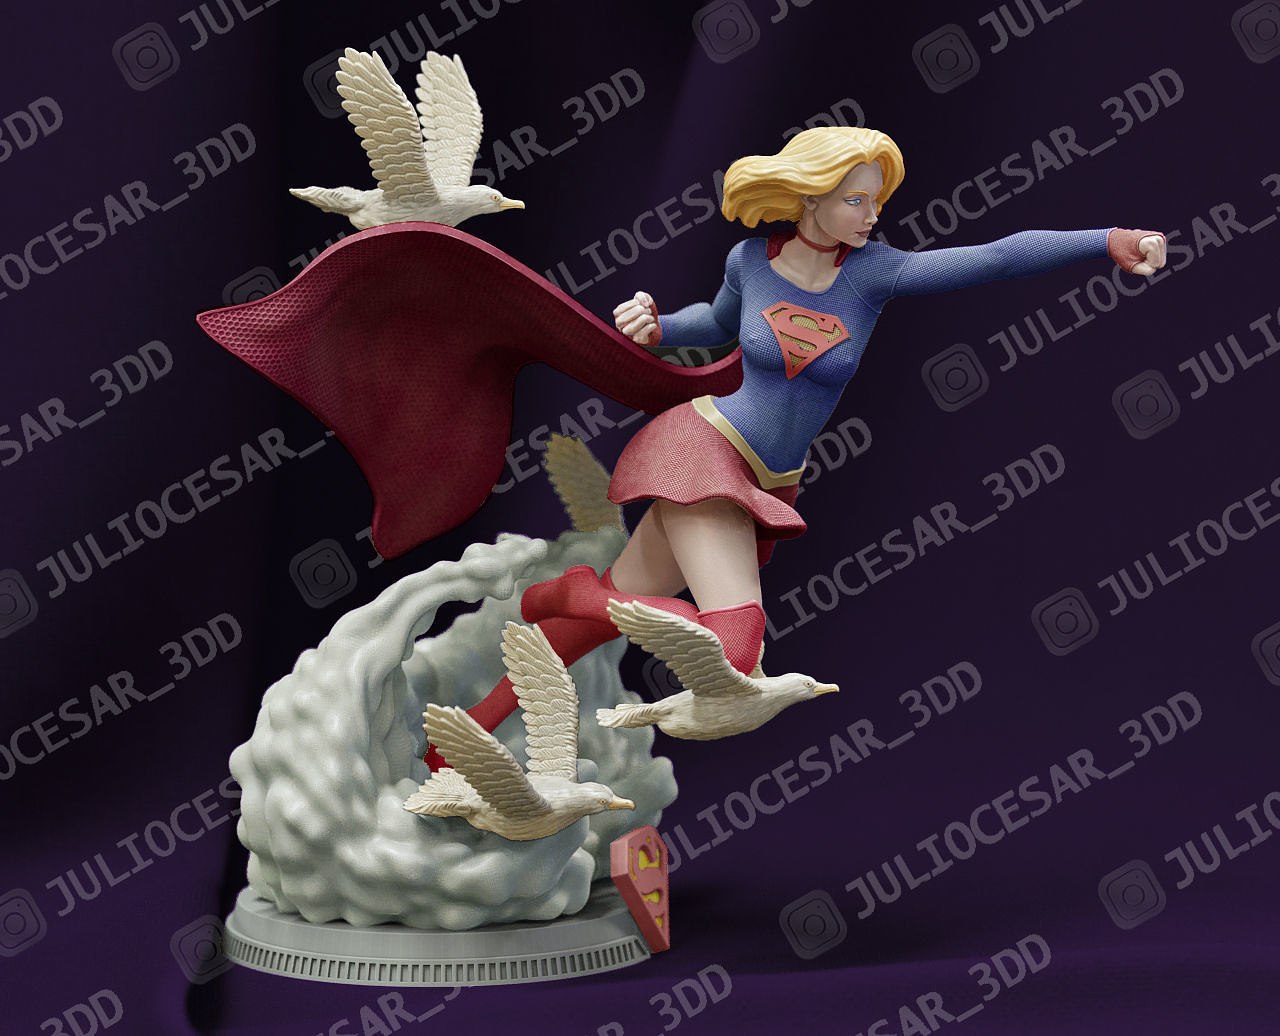 SuperGirl Punch Pose from DC